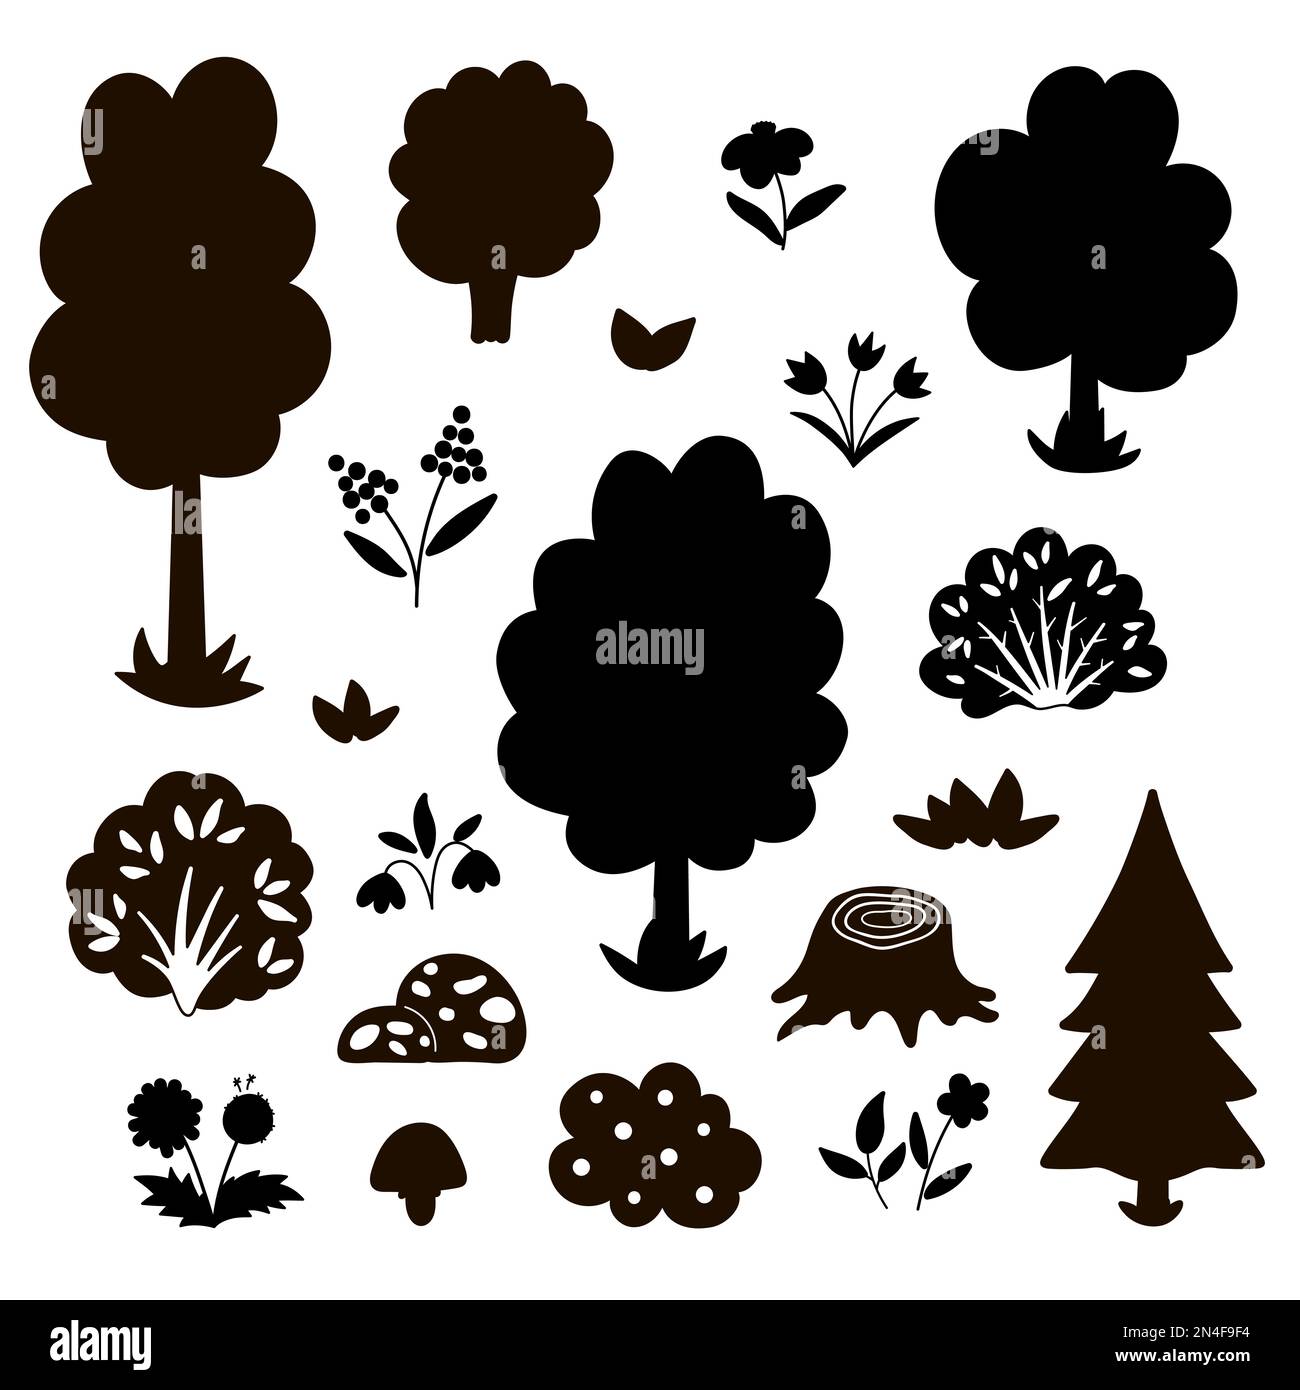 Vector black and white set with garden or forest trees, plants, shrubs, bushes, flowers silhouettes. Spring woodland or farm black illustration. Natur Stock Vector